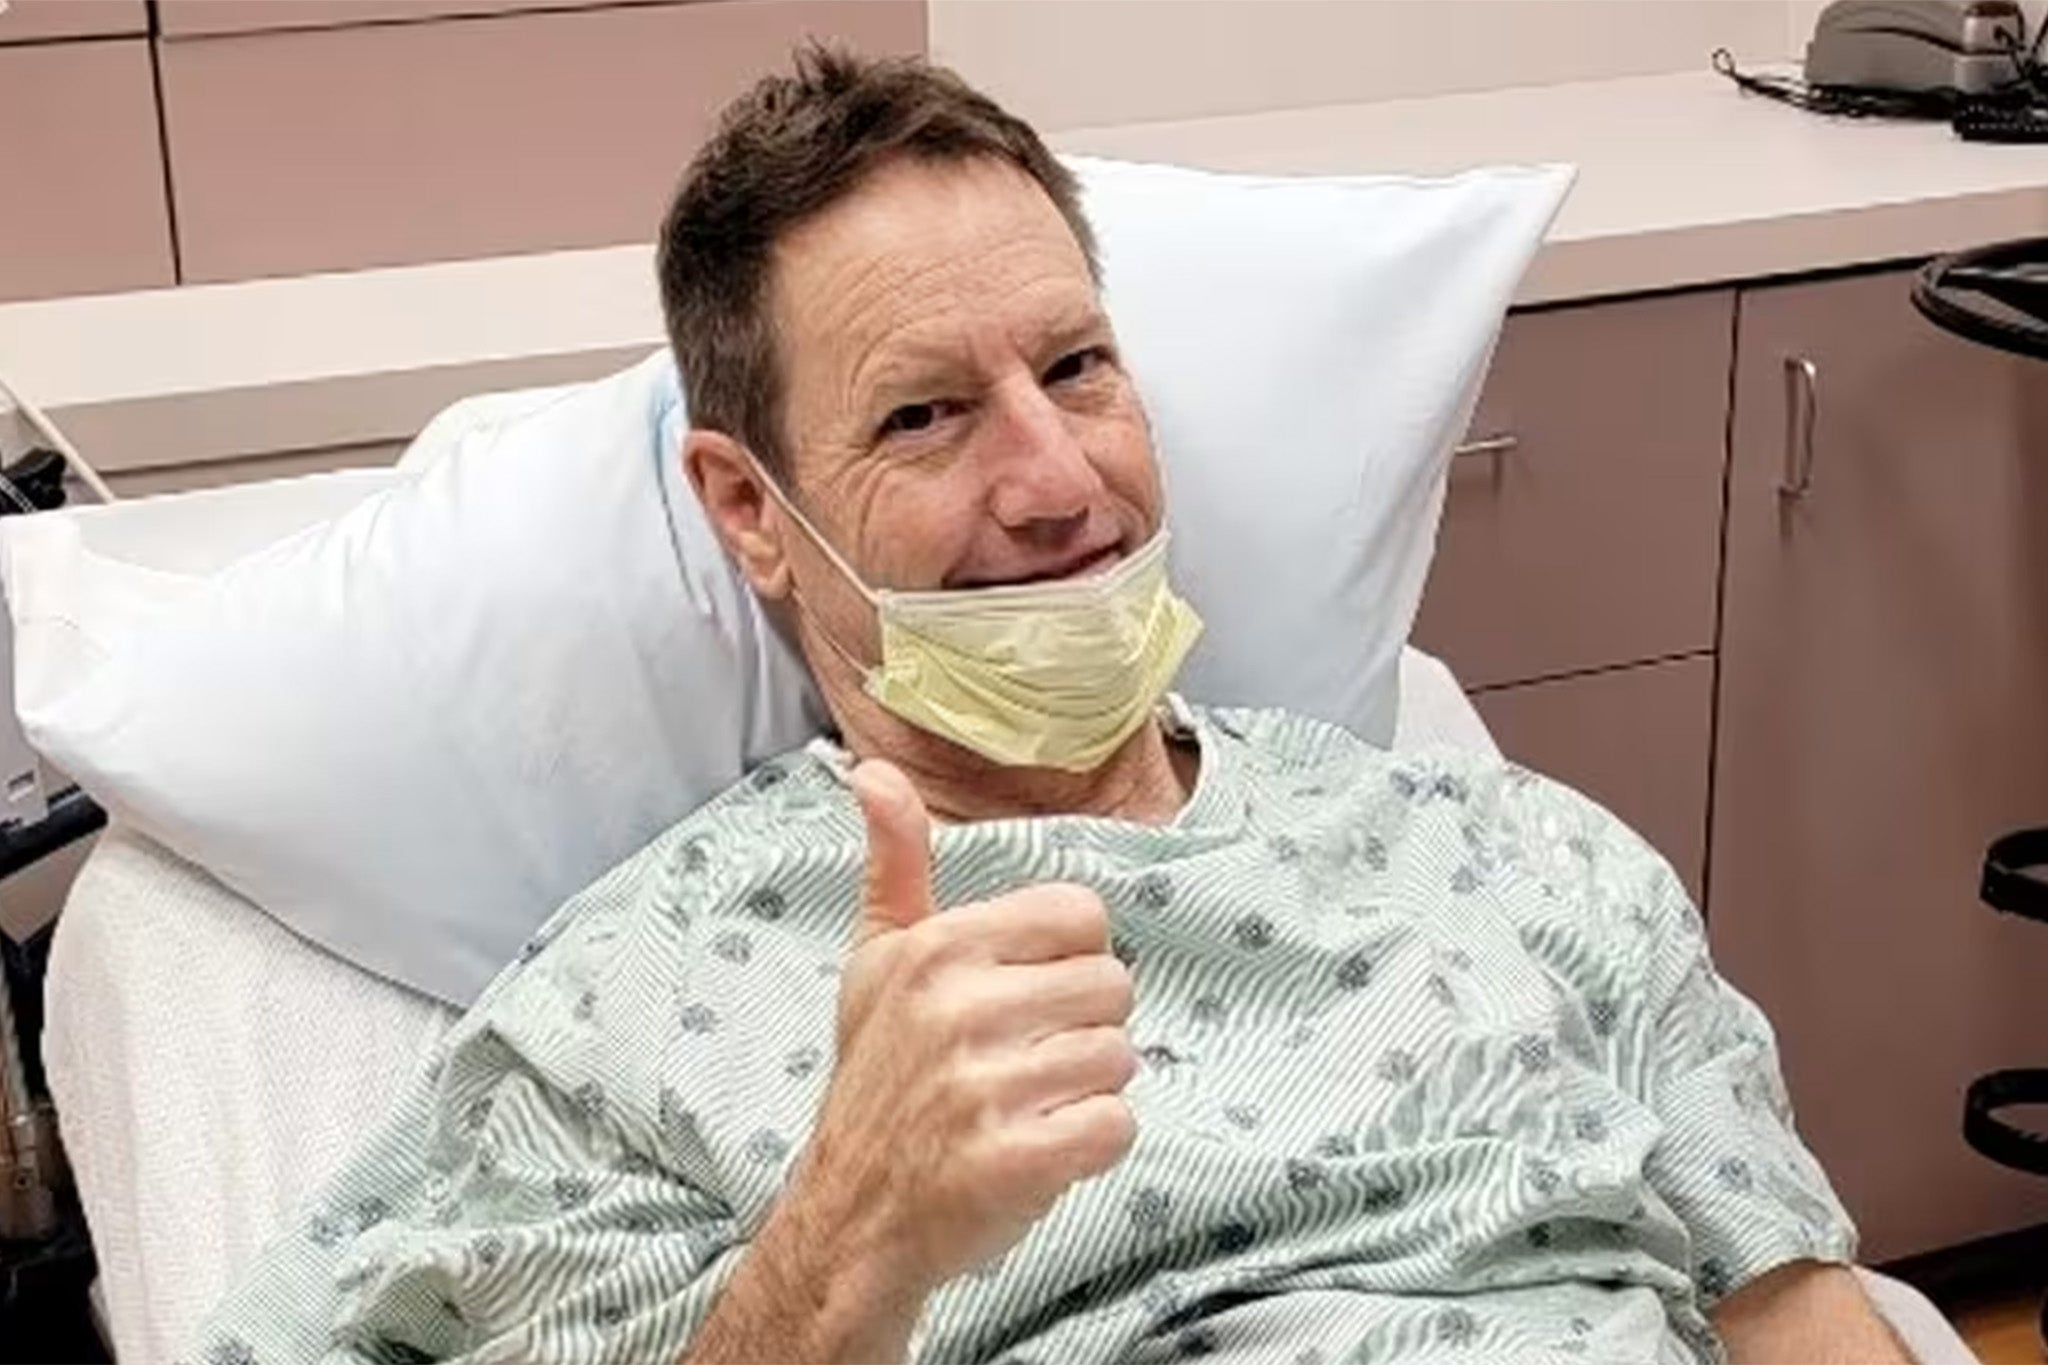 Jeff Bolle pictured in hospital